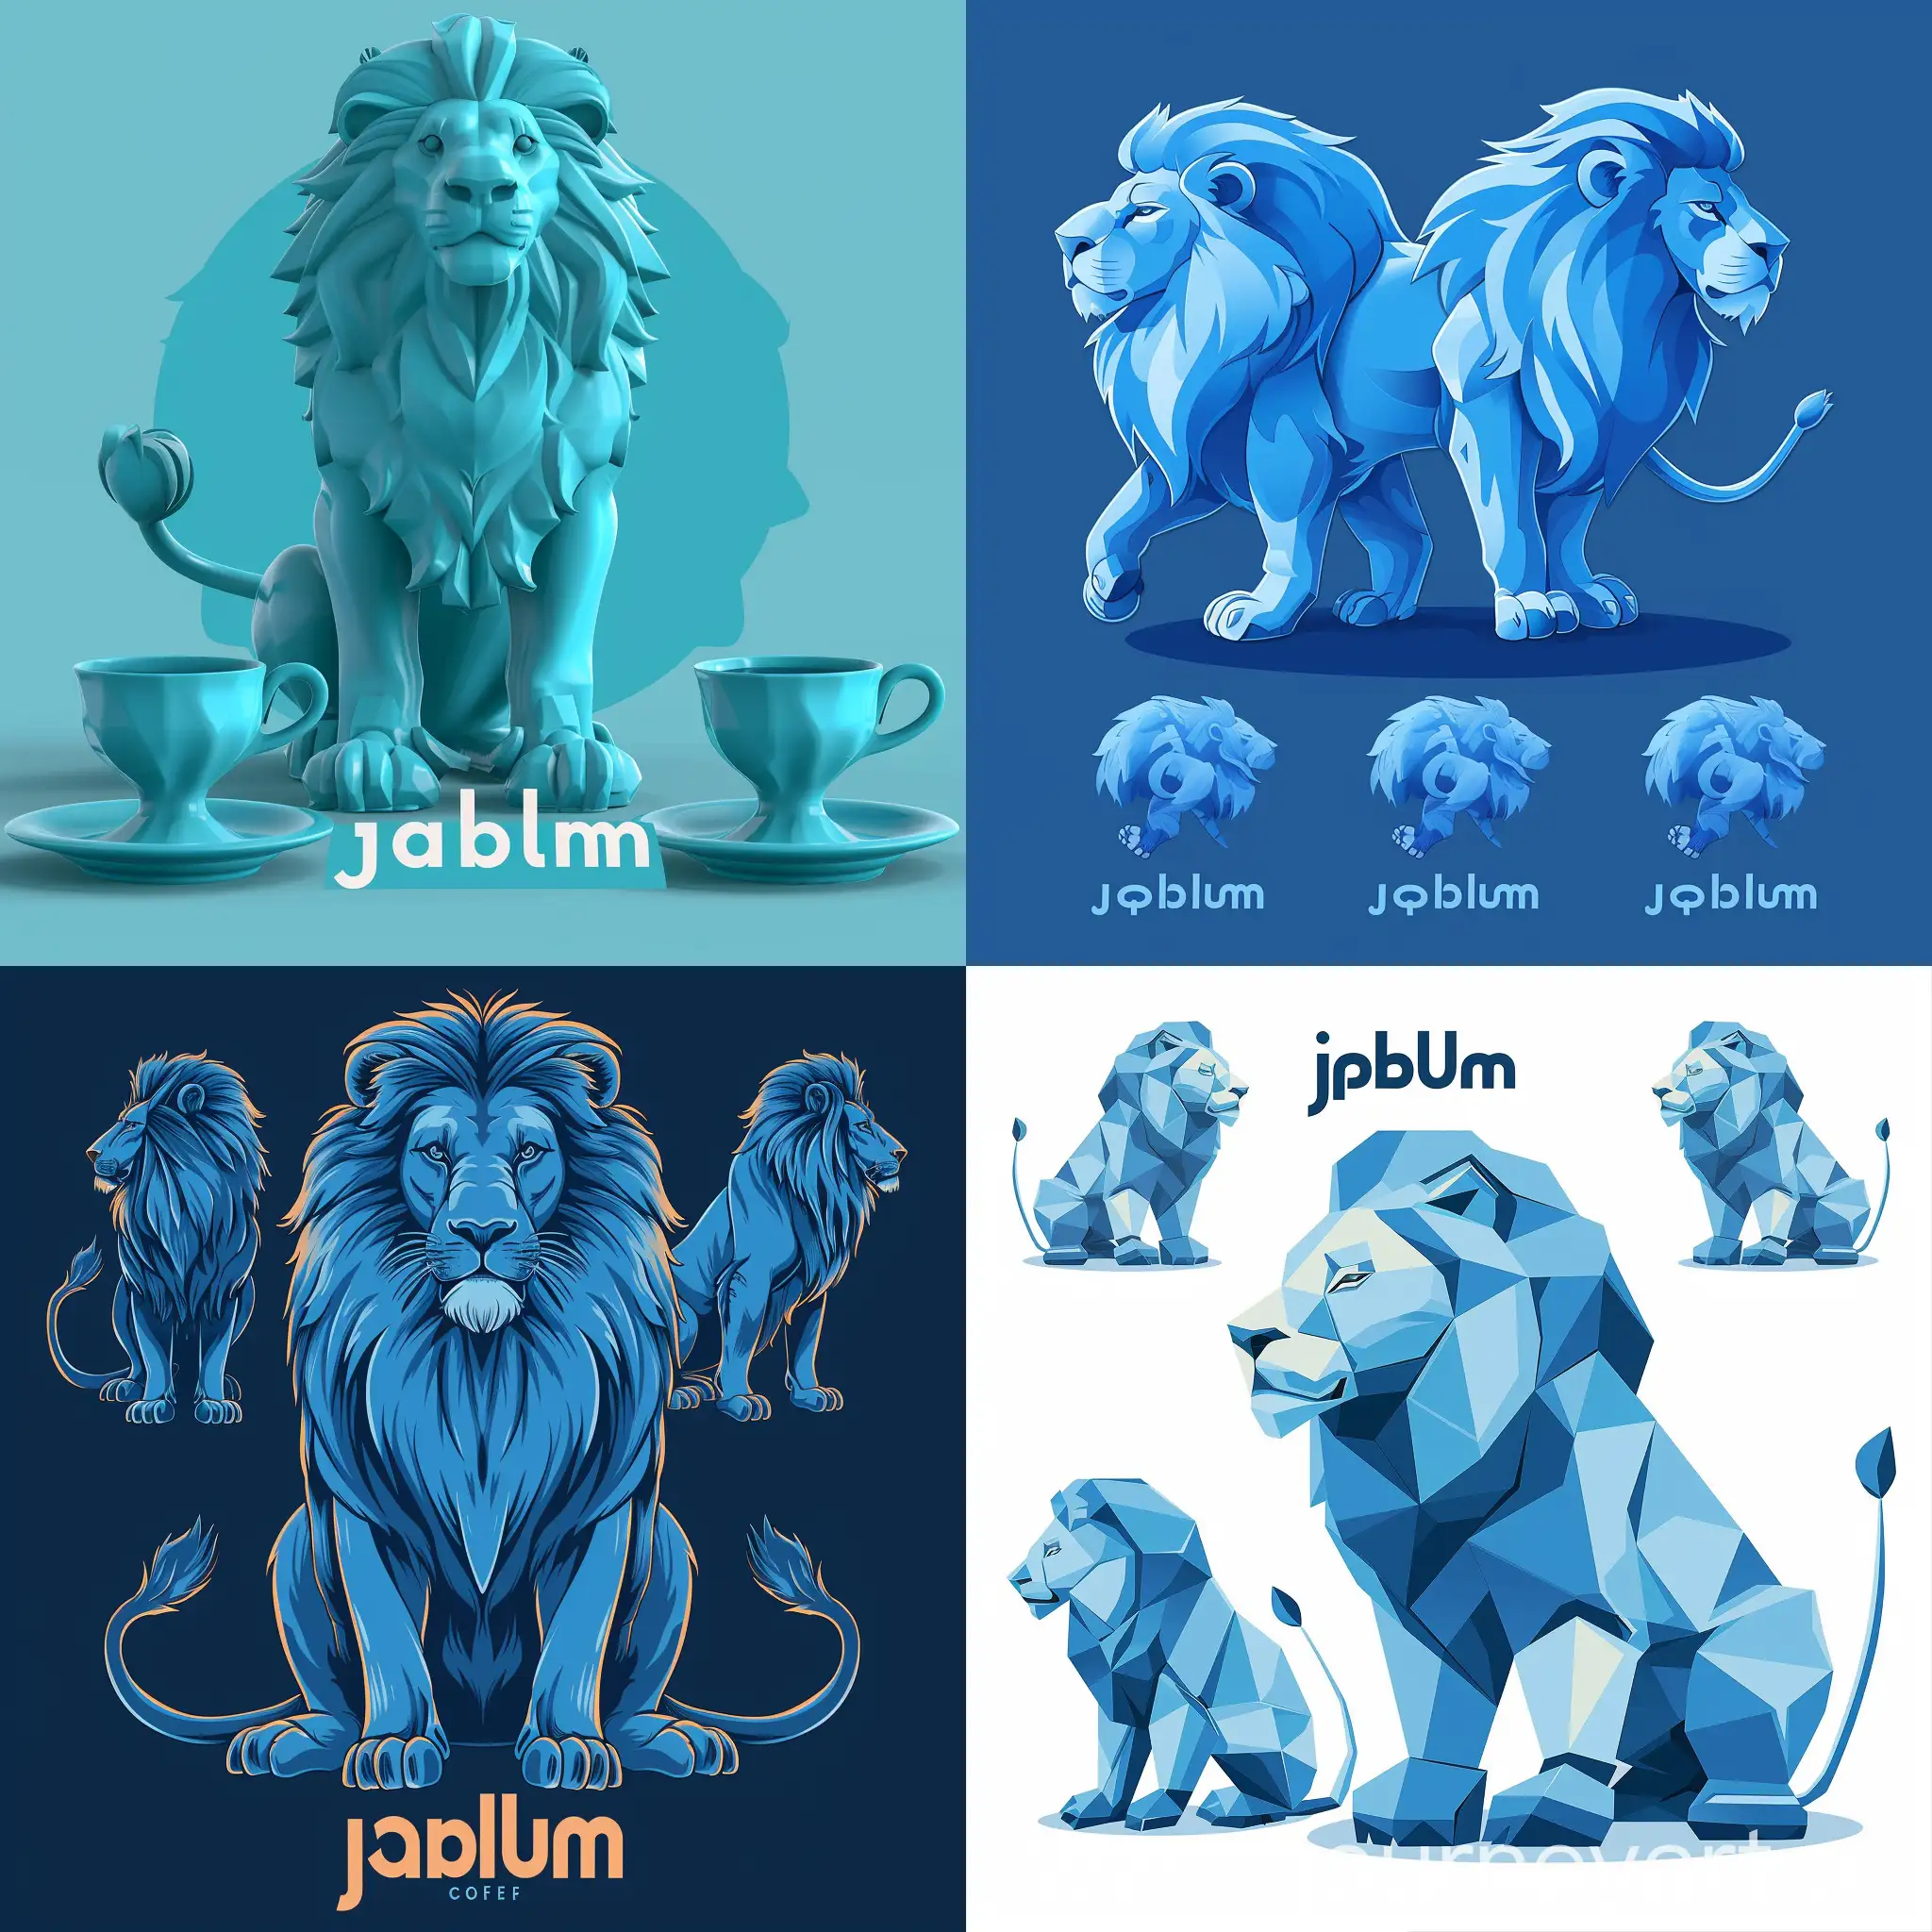 Majestic-Lion-Branding-for-Jablum-Coffee-in-Cool-Blue-Tones